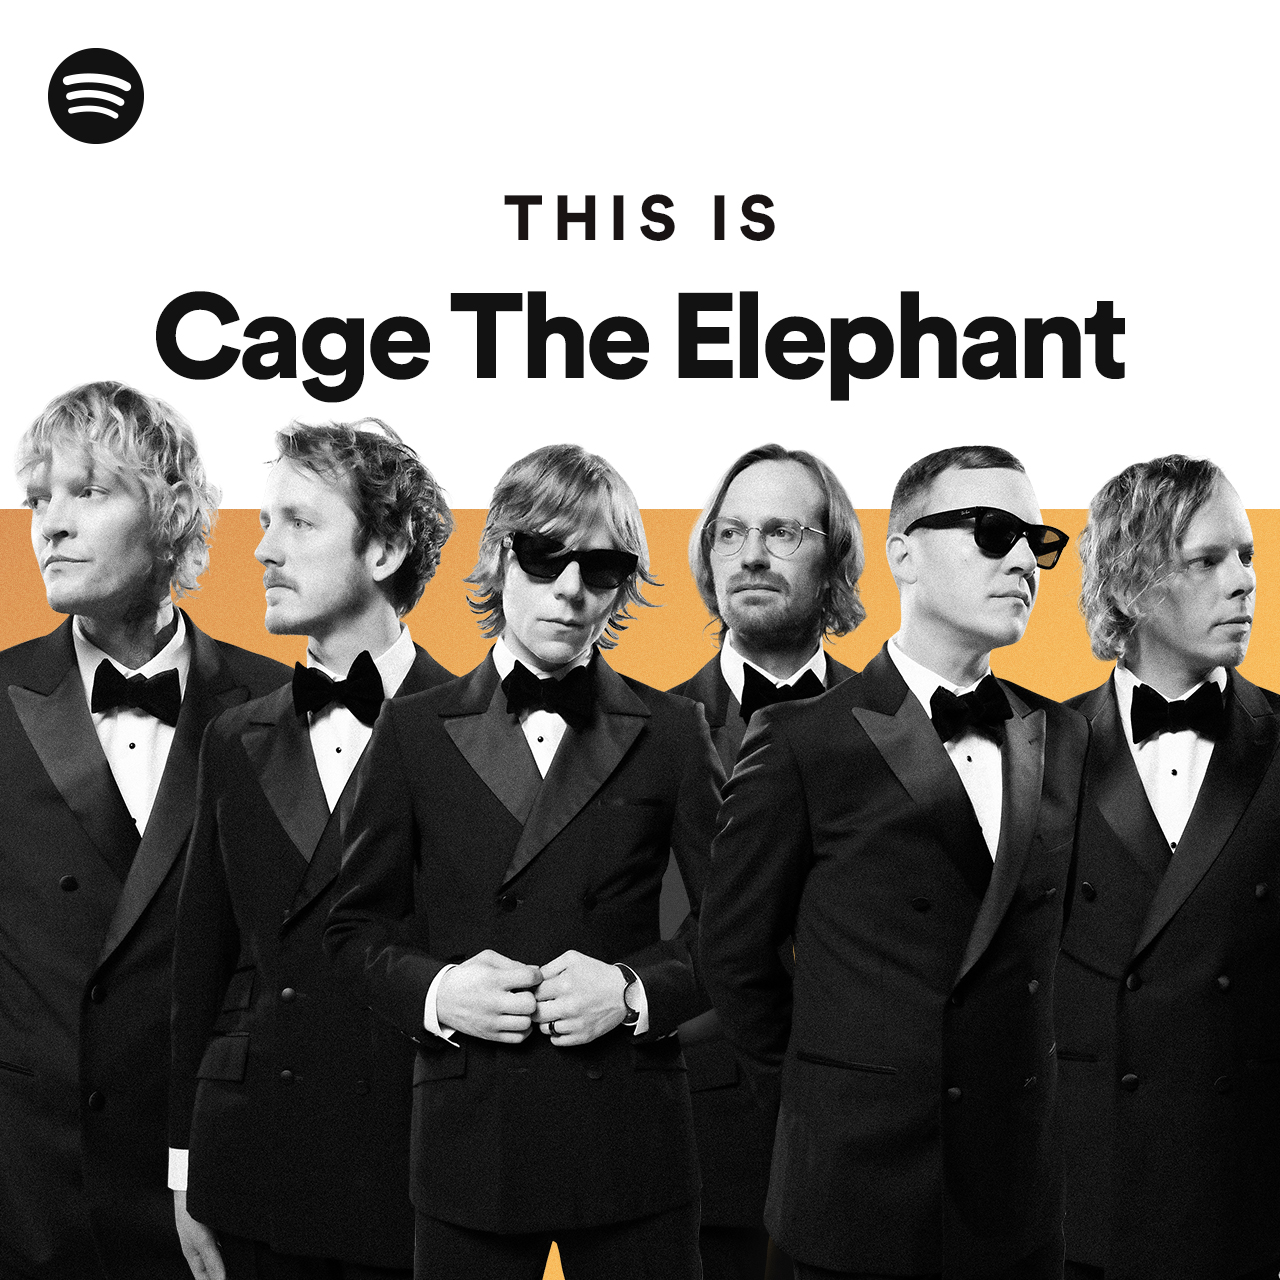 This Is Cage The Elephant